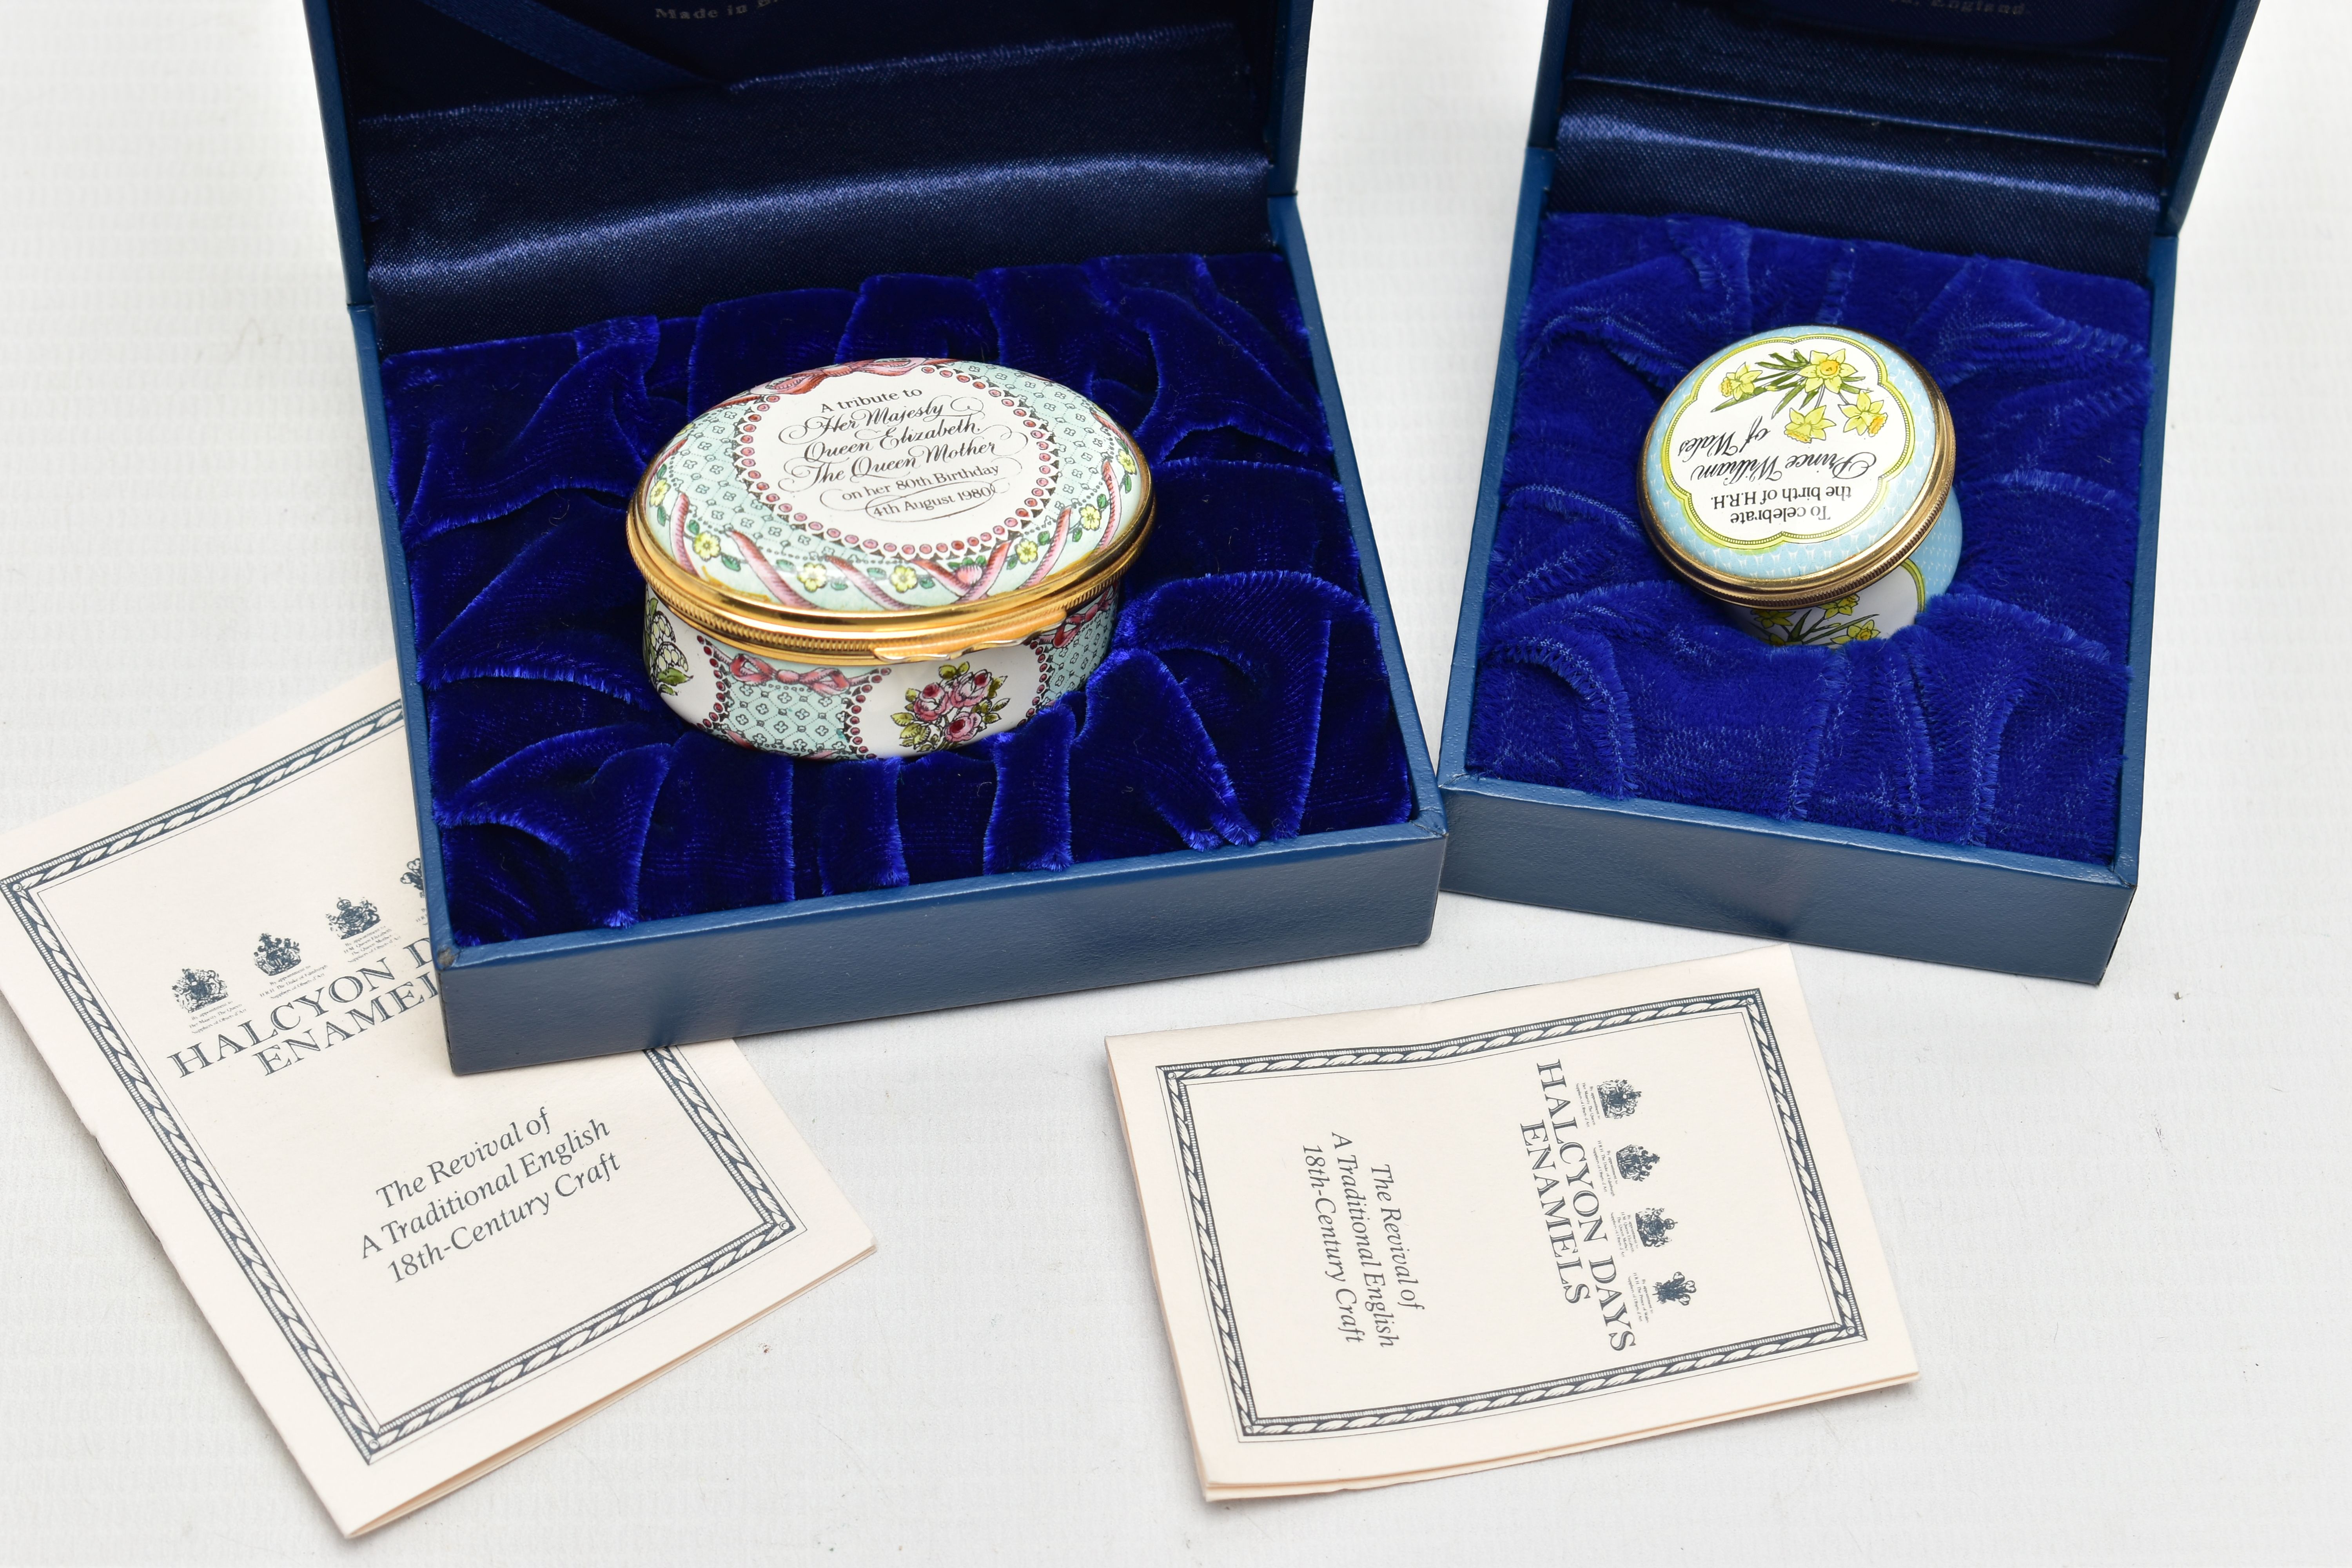 TWO HALCYON DAYS ENAMEL TRINKET BOXES, the first to commemorate Queen Elizabeth the Queen Mother